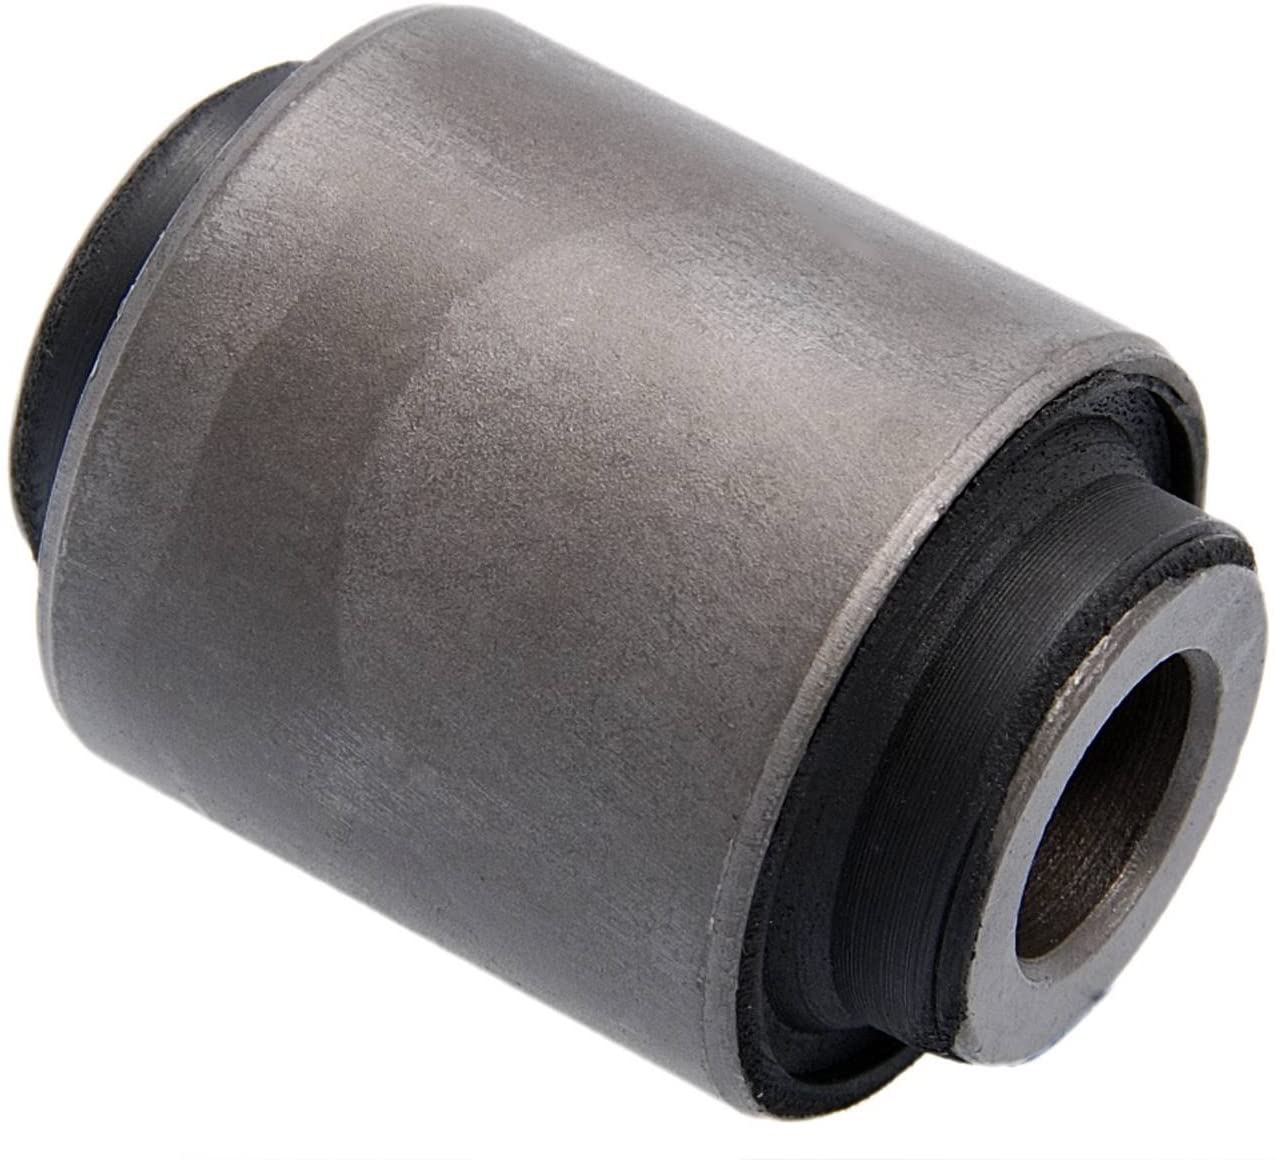 55110Jg000 - Arm Bushing (For Track Control Arm) For Nissan - Febest